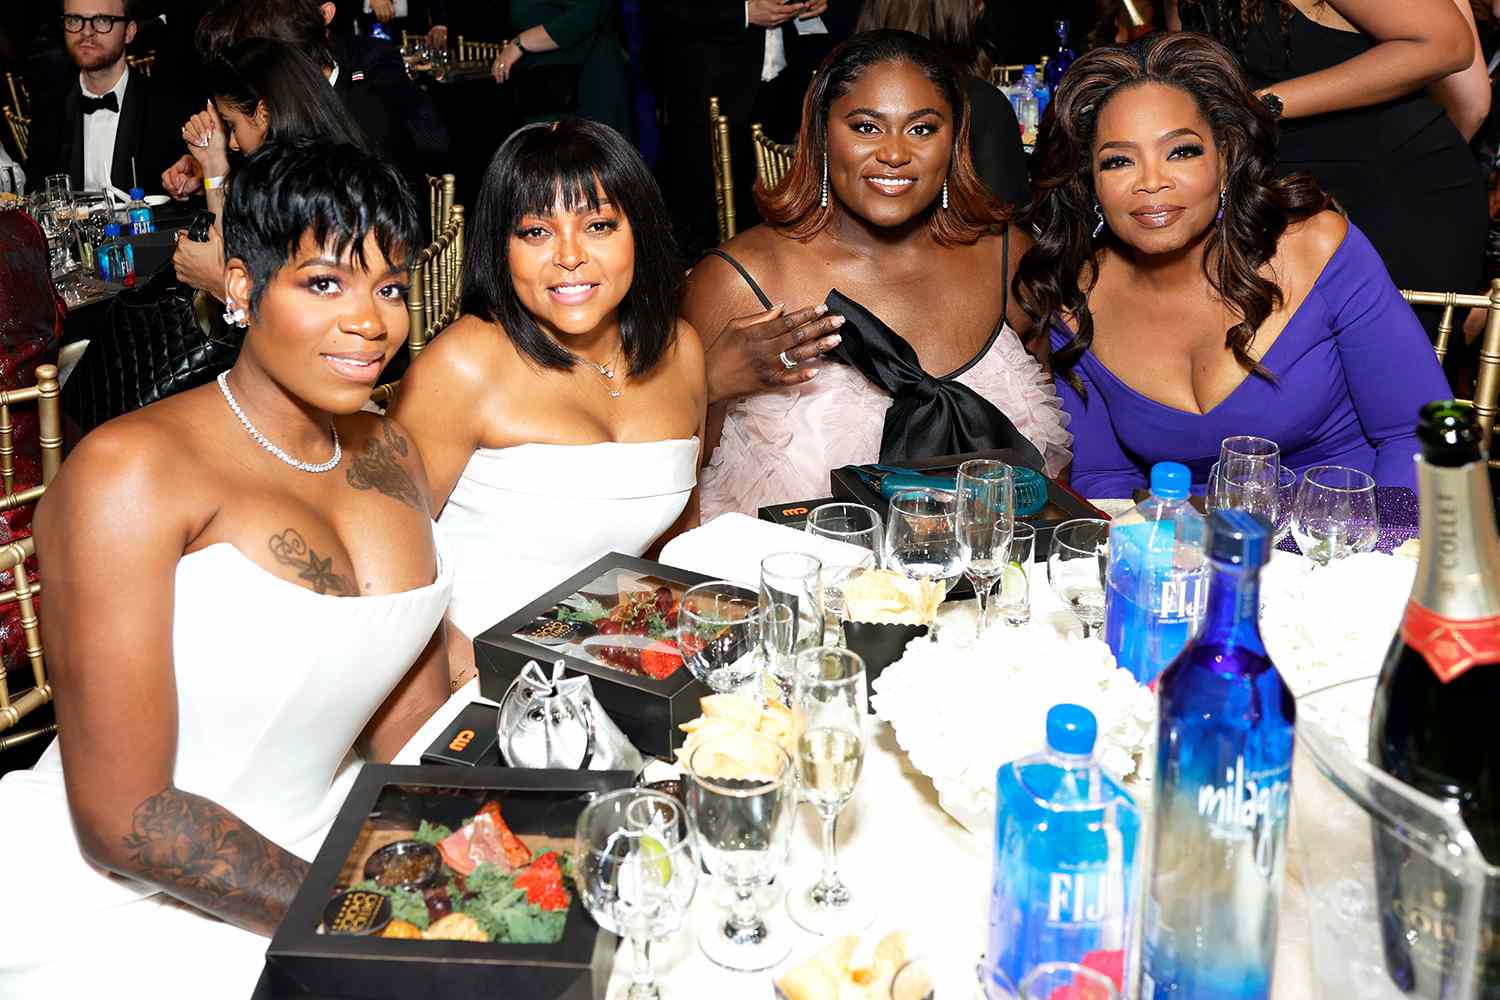 Fantasia Barrino And Others Disapprove Of Bagged Pizza Dinner At Critics Choice Awards